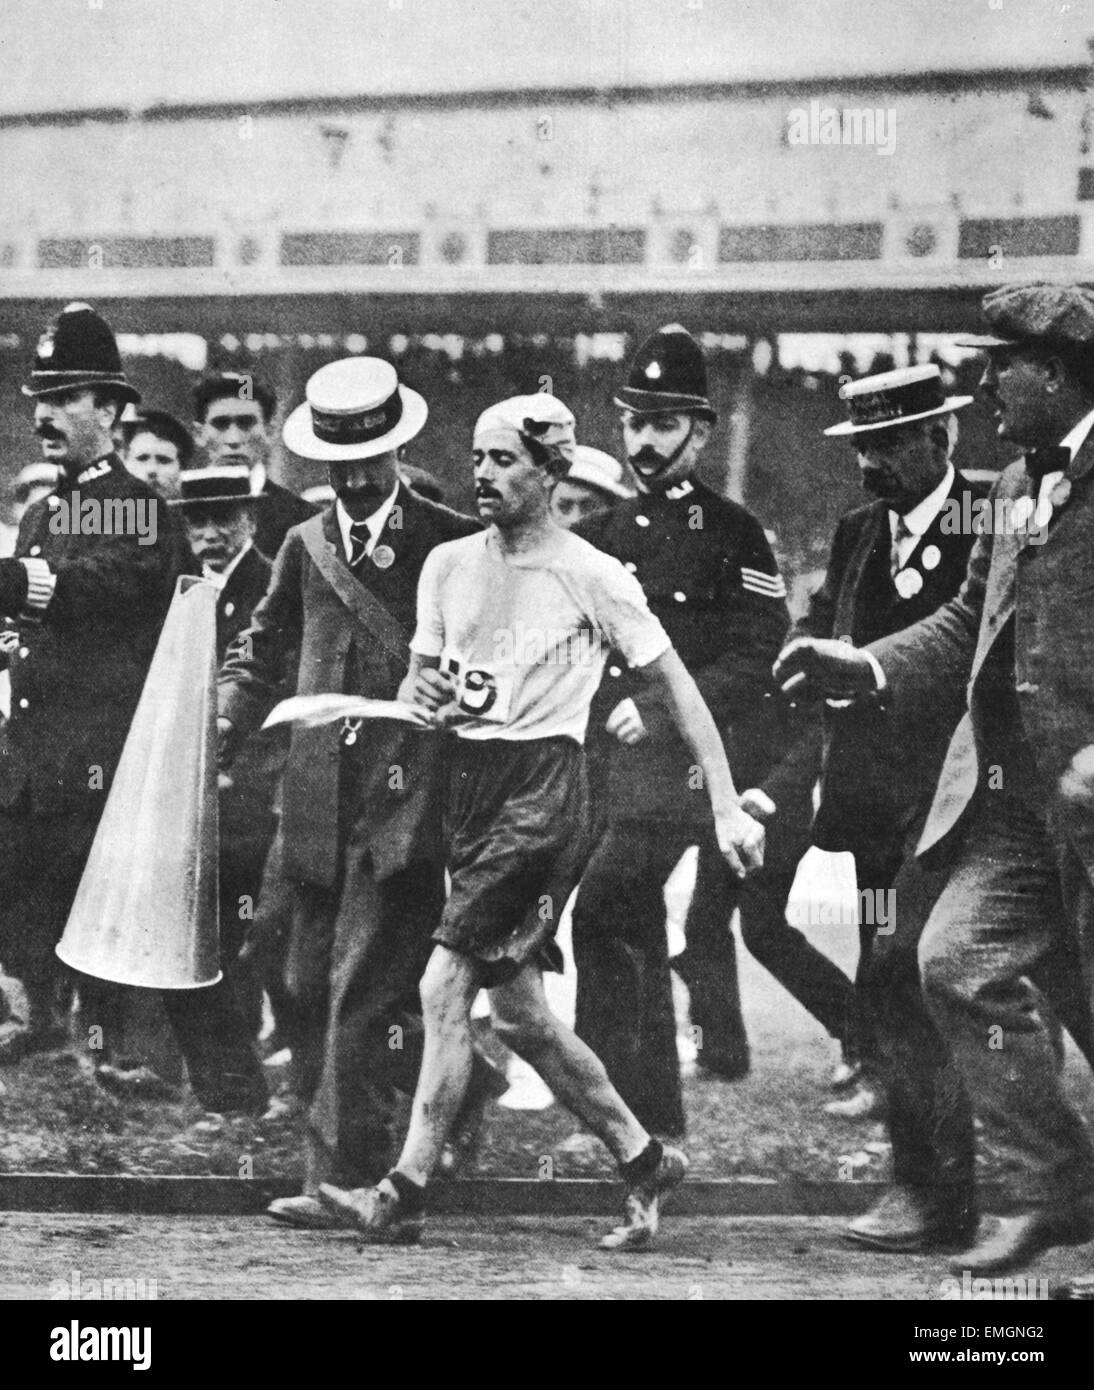 London 1908 Olympic Games One of the earliest Olympic dramas to be captured on film. Pietri Dorando is helped after he collapses just before crossing the finishing line in the 1908 Olympic Marathon. Dorando was disqualified from the race after receiving help from the official holding the megaphone in the final lap. The picture went all around the world. 24 July 1908 Stock Photo